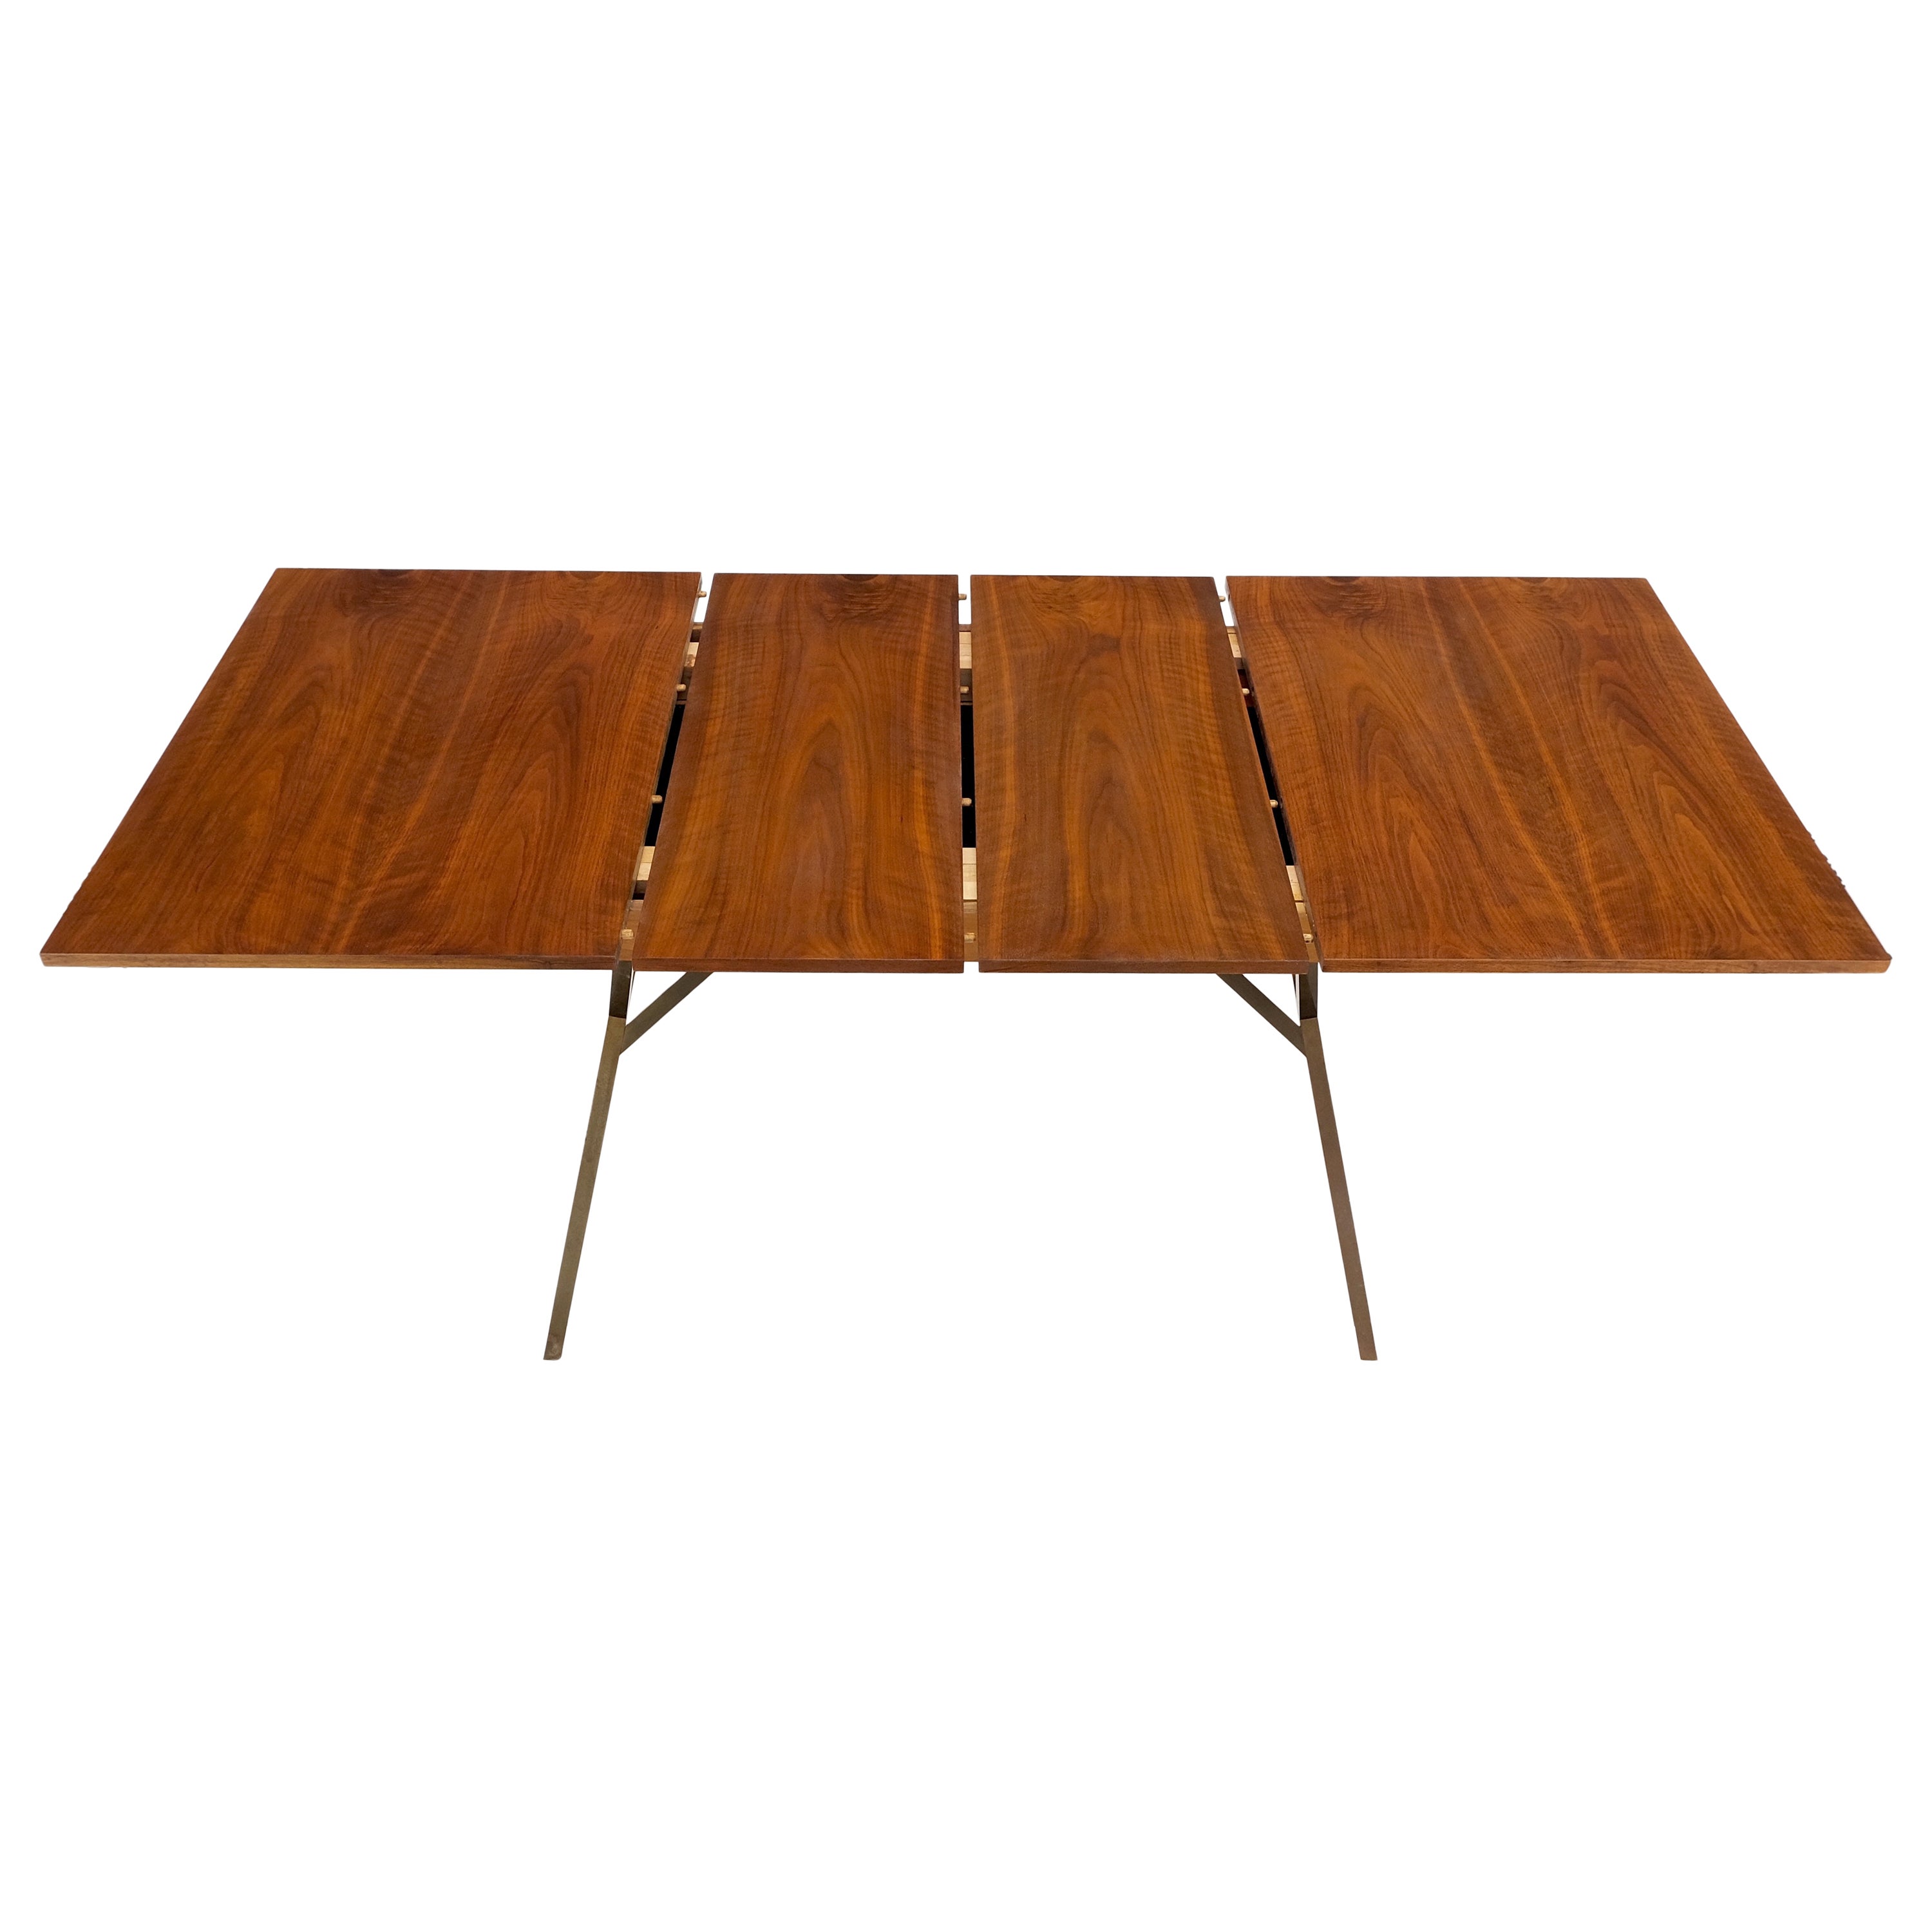 Solid Bronze Square Profile Two Extension Boards Walnut Top Dining Table Mint!